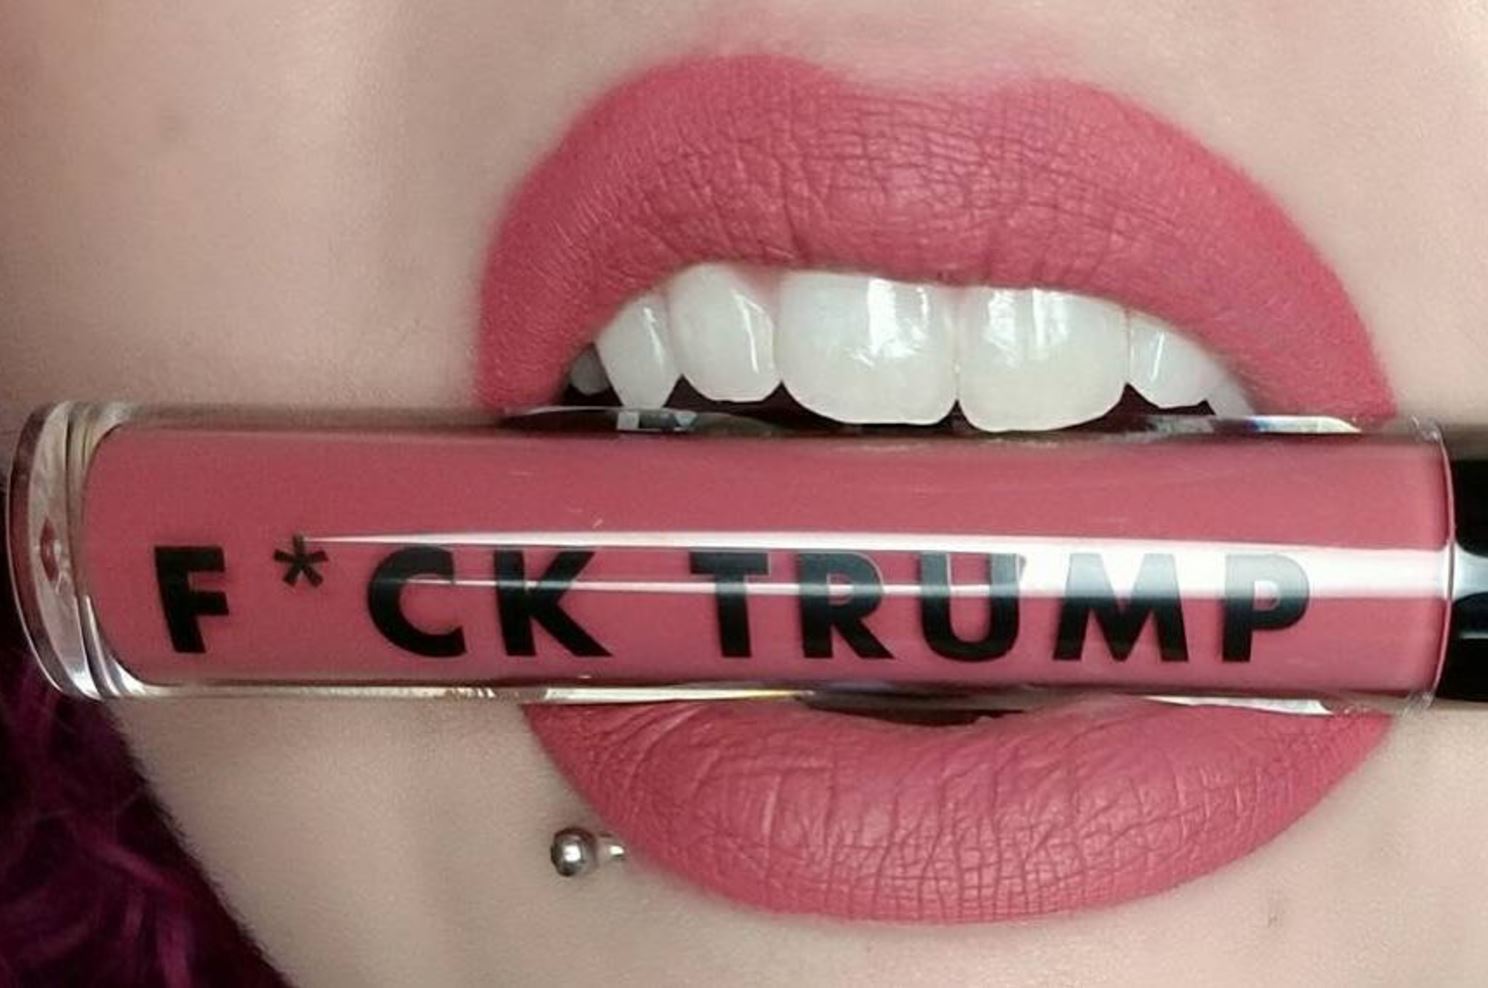 This perfect wedding lipstick doubles as a Trump protest